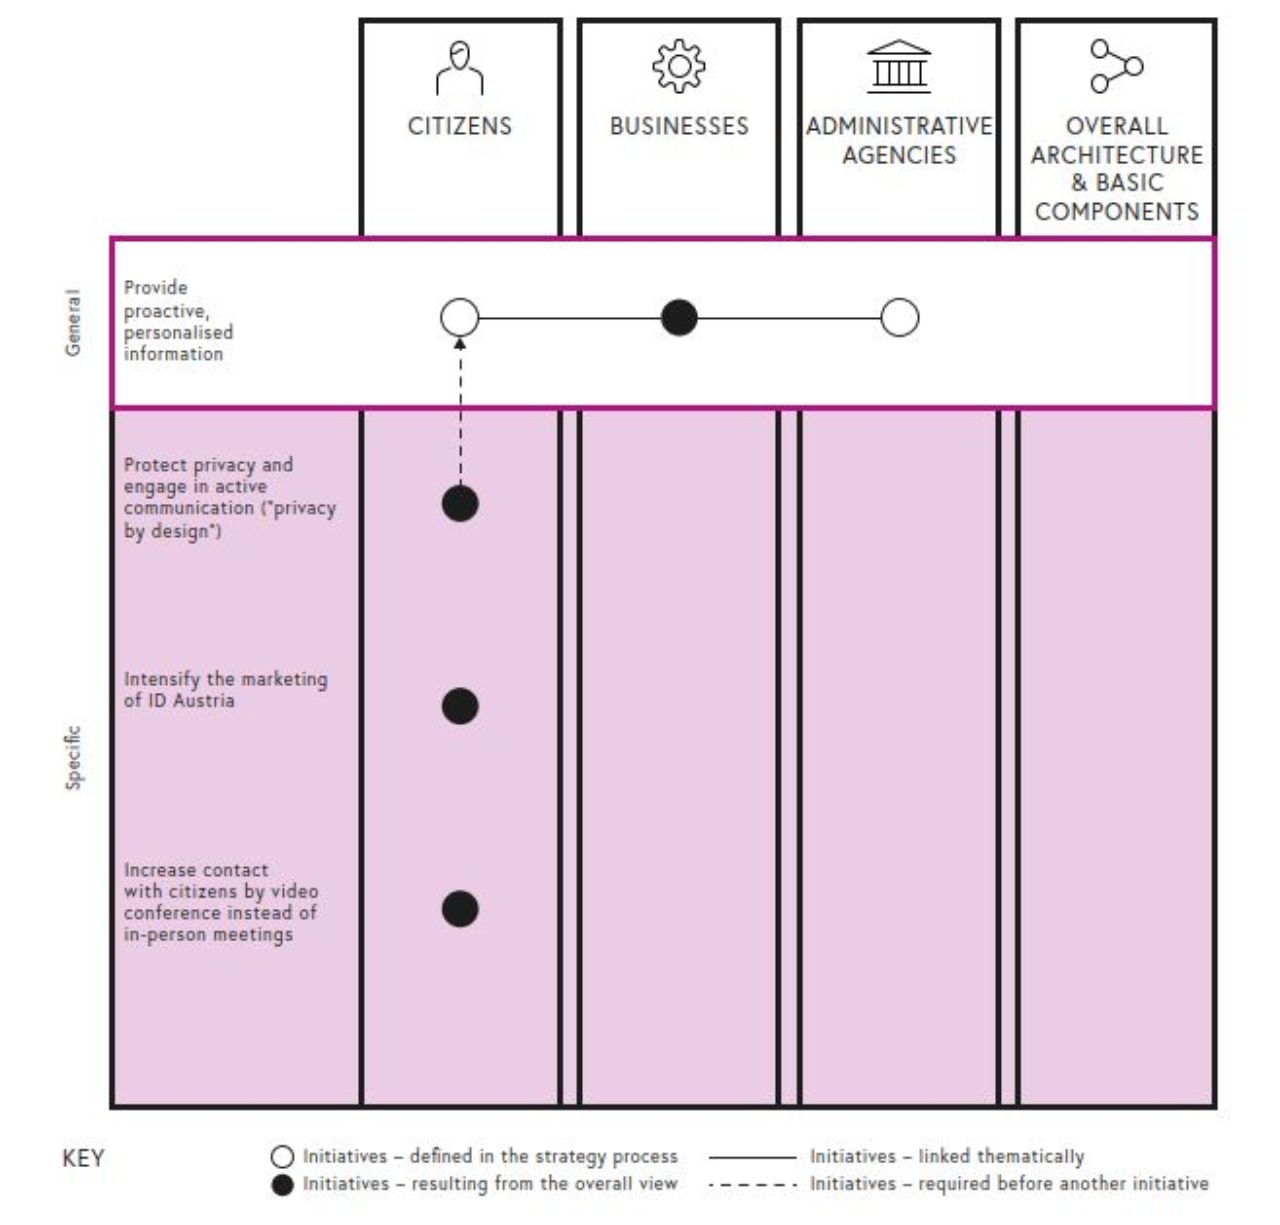 The chart shows the overall actions that should be taken towards proactive, personalised information for citicens. In detail the actions will inlude protecting peoples privacy and active communication (PrivacyByDesign); intensifying the marketing of ID Austria; expanding the contact with citizens via videoconference instead of on-site appointments.